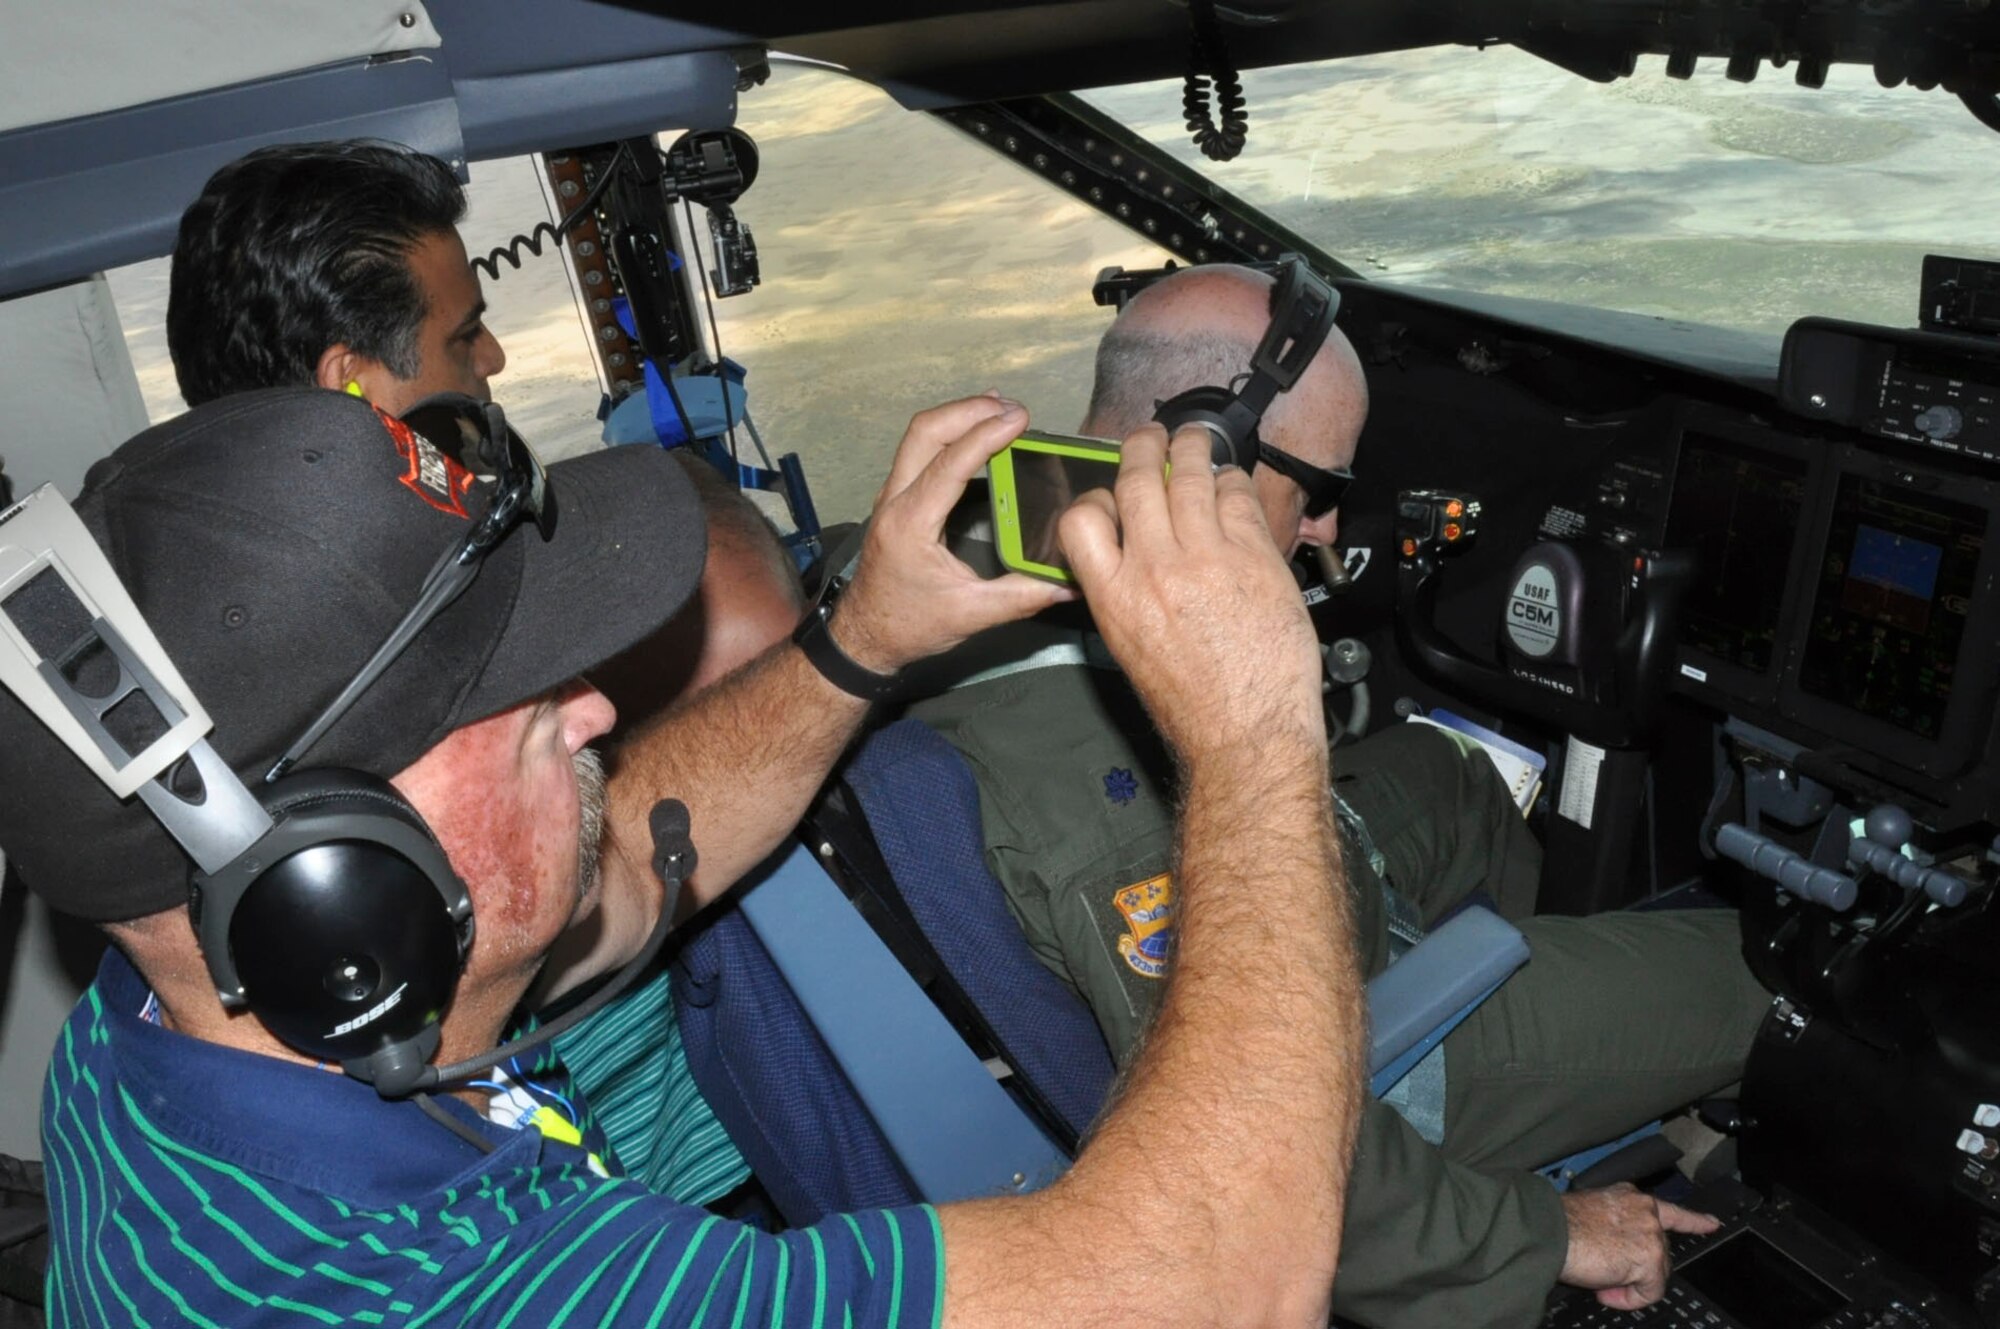 Ray Freitas, San Antonio Fire Department, takes a photo with his phone of the scenic view along the Texas coastline during the 433rd Airlift Wing’s Boss Lift June 10, 2017.  The Boss Lift, which is sponsored by the Employer Support of the Guard and Reserve, promotes cooperation and understanding between Reserve component service members and their civilian employers. (U.S. Air Force photo/Senior Airman Bryan Swink)